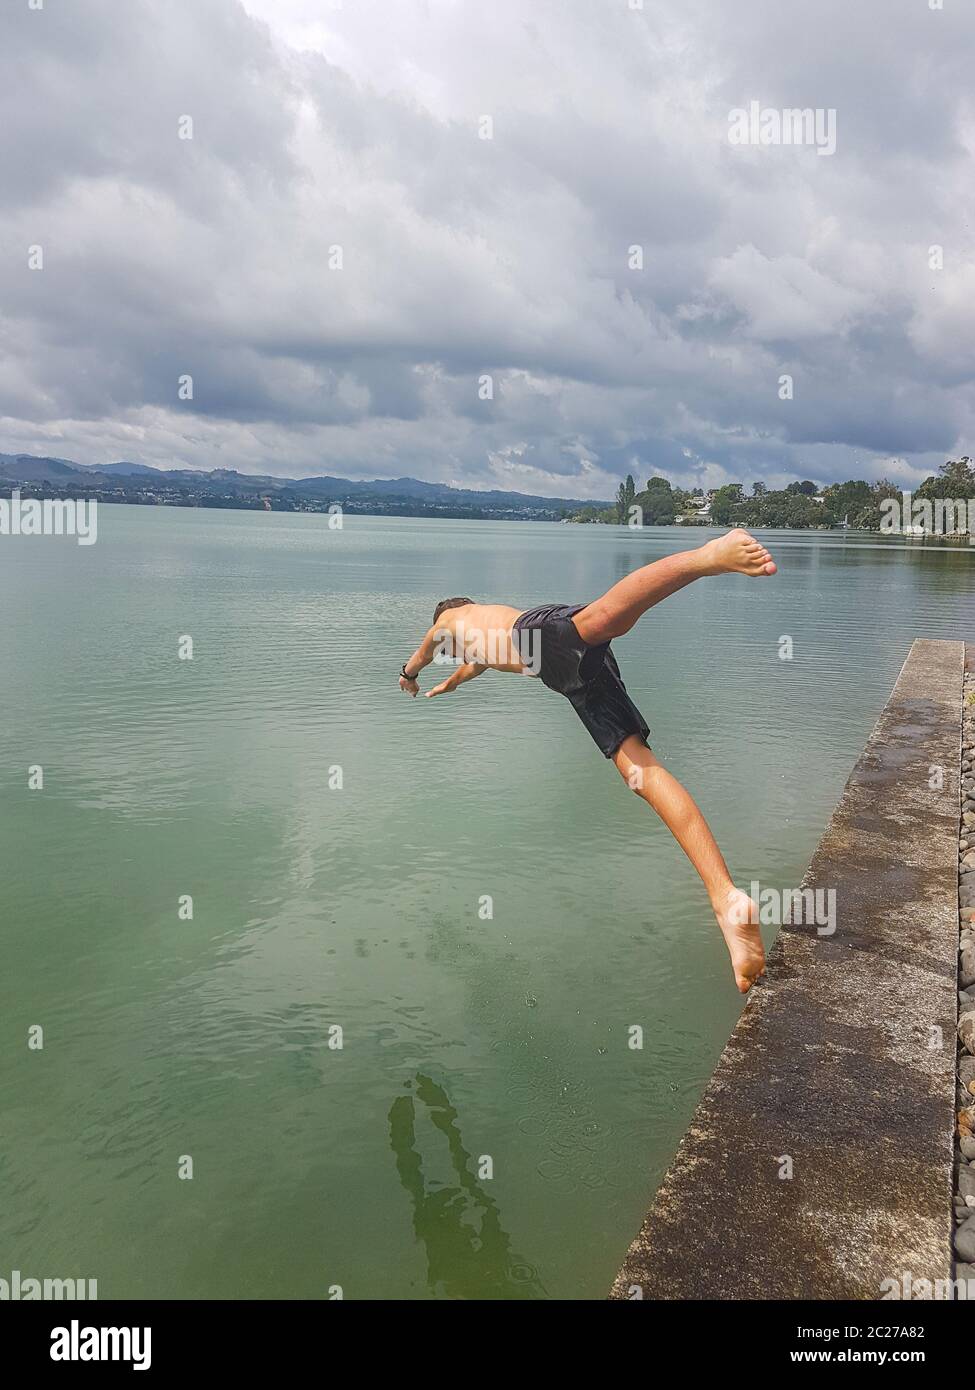 Mobile phone photo boy leaping into sea from edge. Stock Photo